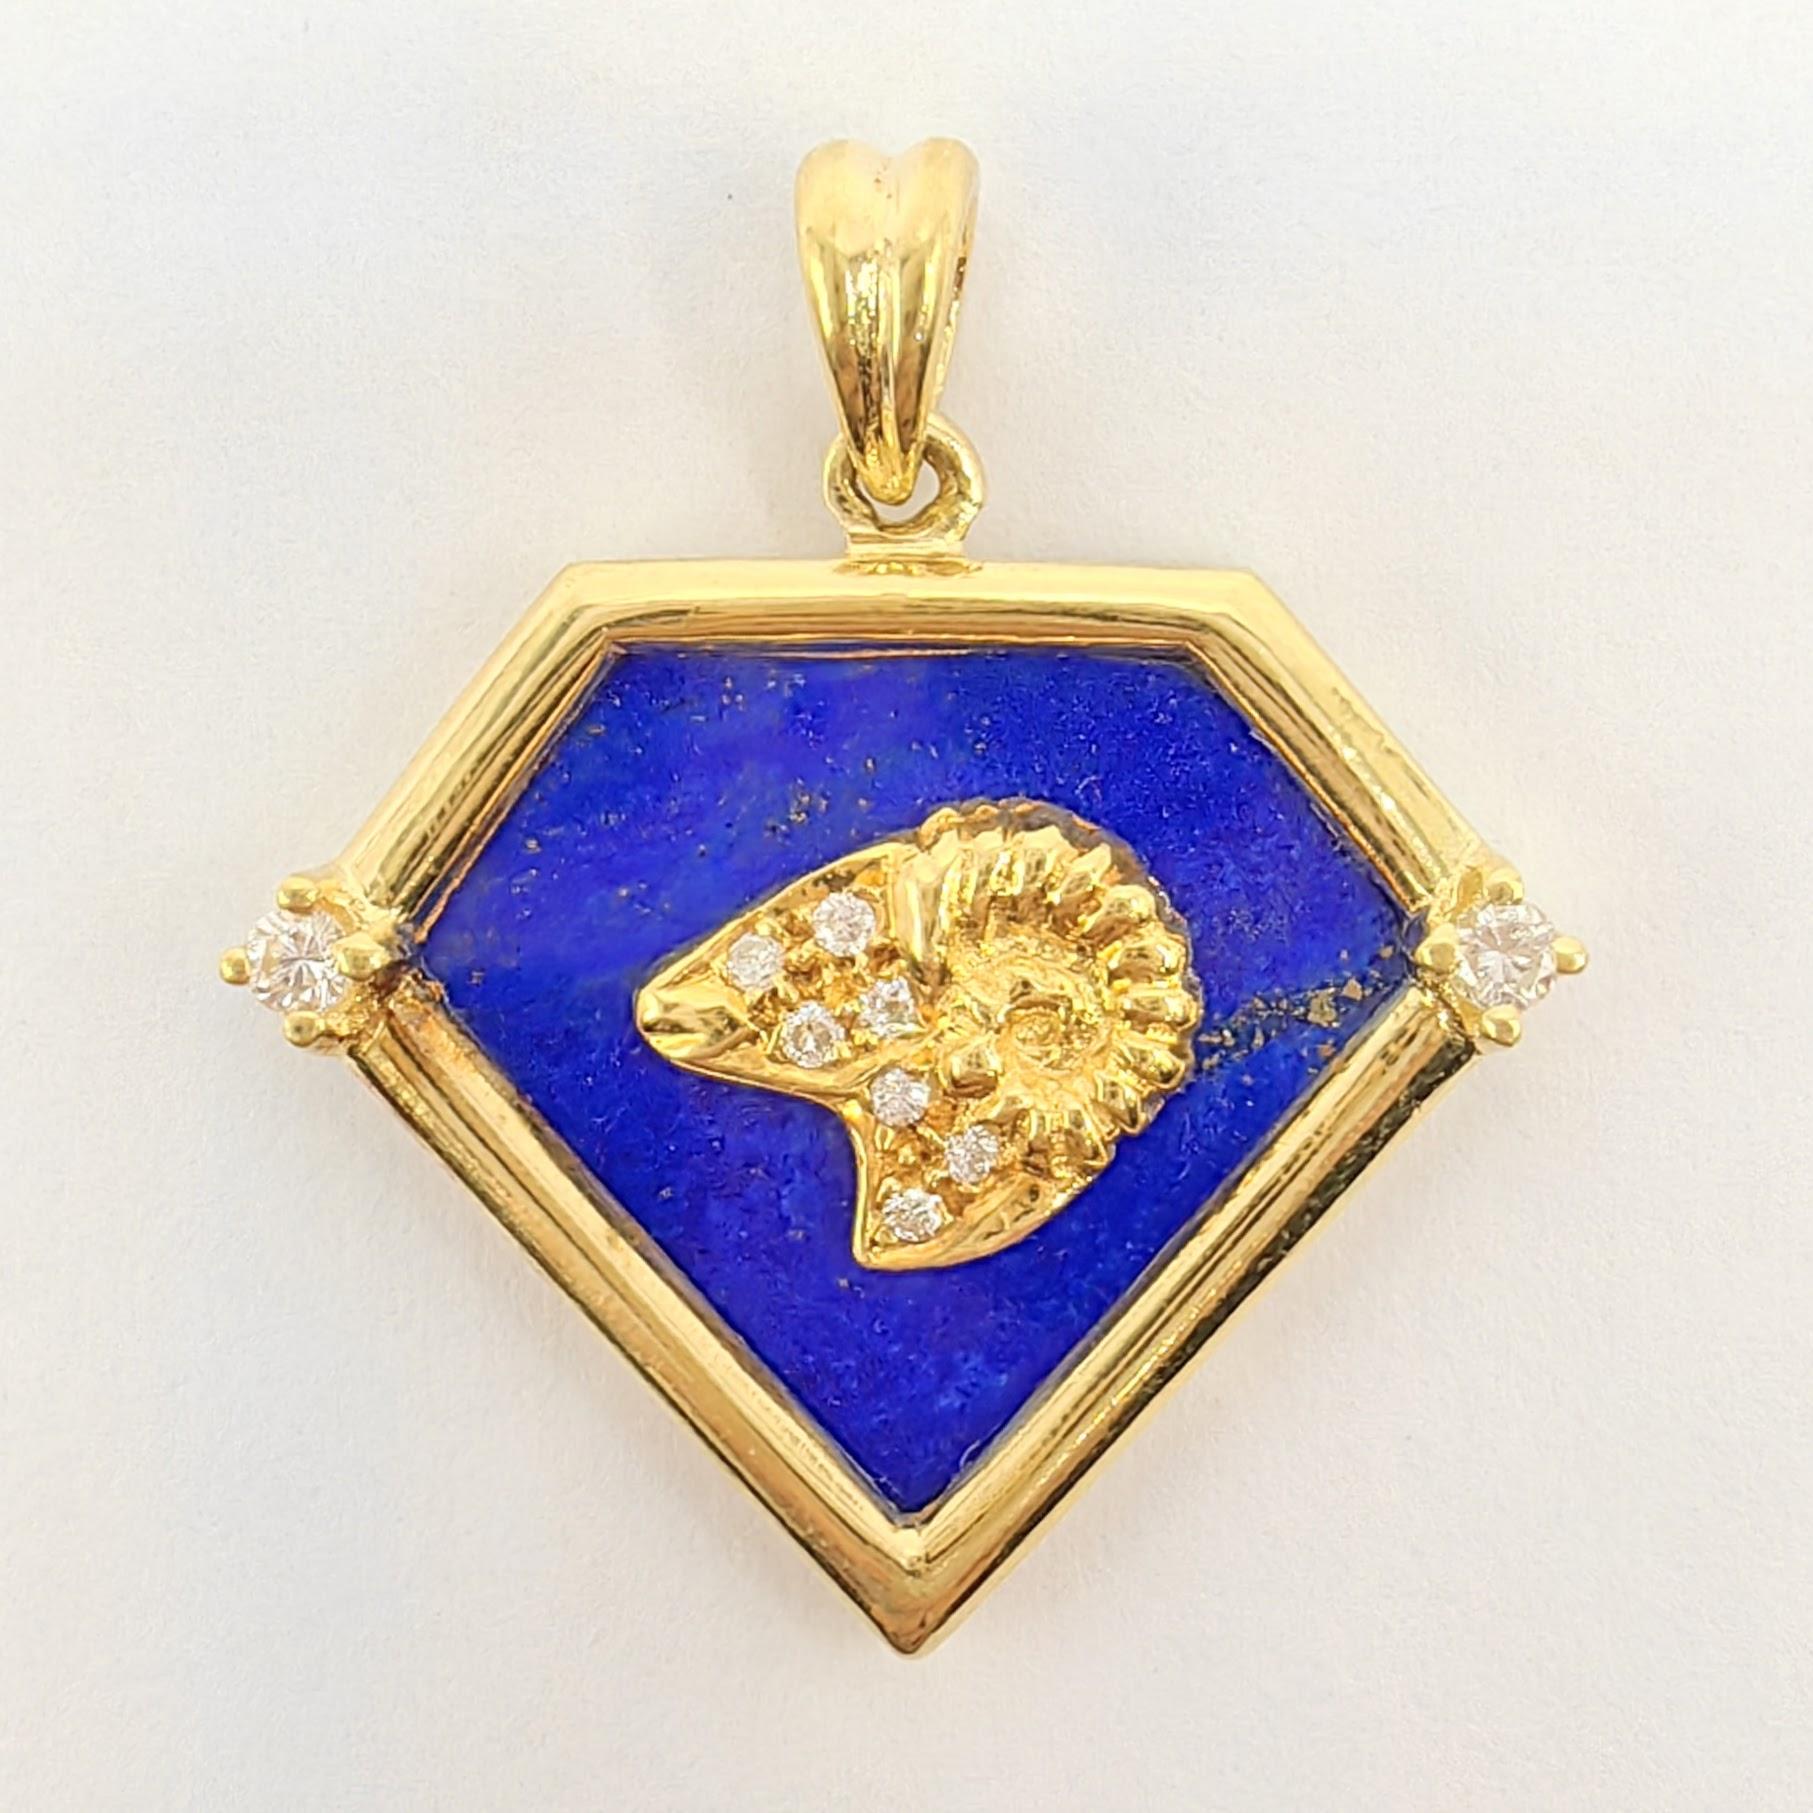 Introducing the Vintage 90's Aries Blue Lapis Diamond Necklace Pendant in 20K Yellow Gold. This pendant is a true embodiment of celestial beauty and timeless elegance.

At the heart of this pendant lies a beautifully crafted Aries zodiac motif in